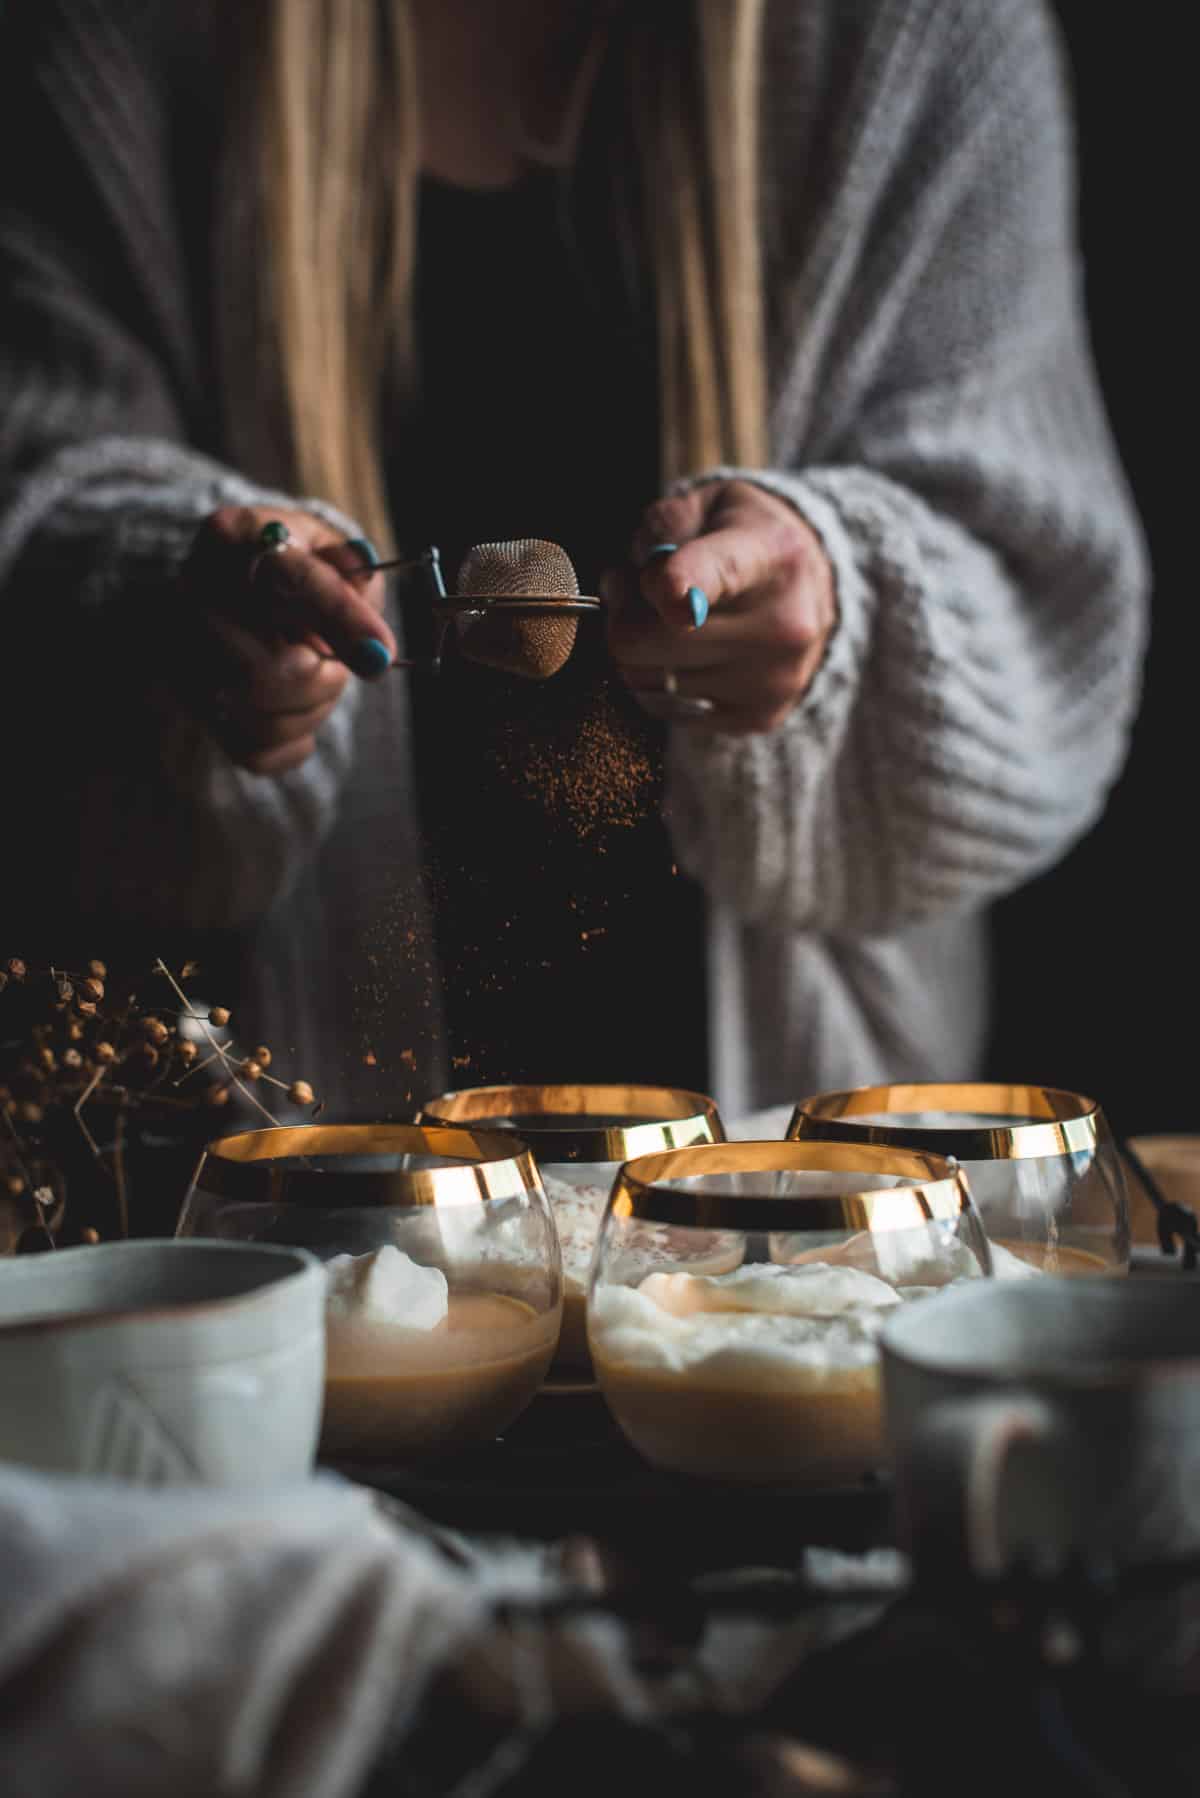 4 gold rimmed glasses are sitting on a crowded counter alongside other cups, dried flowers and  a cloth. A women is gently shaking cinnamon from a small sieve on top of the panna cotta desserts.